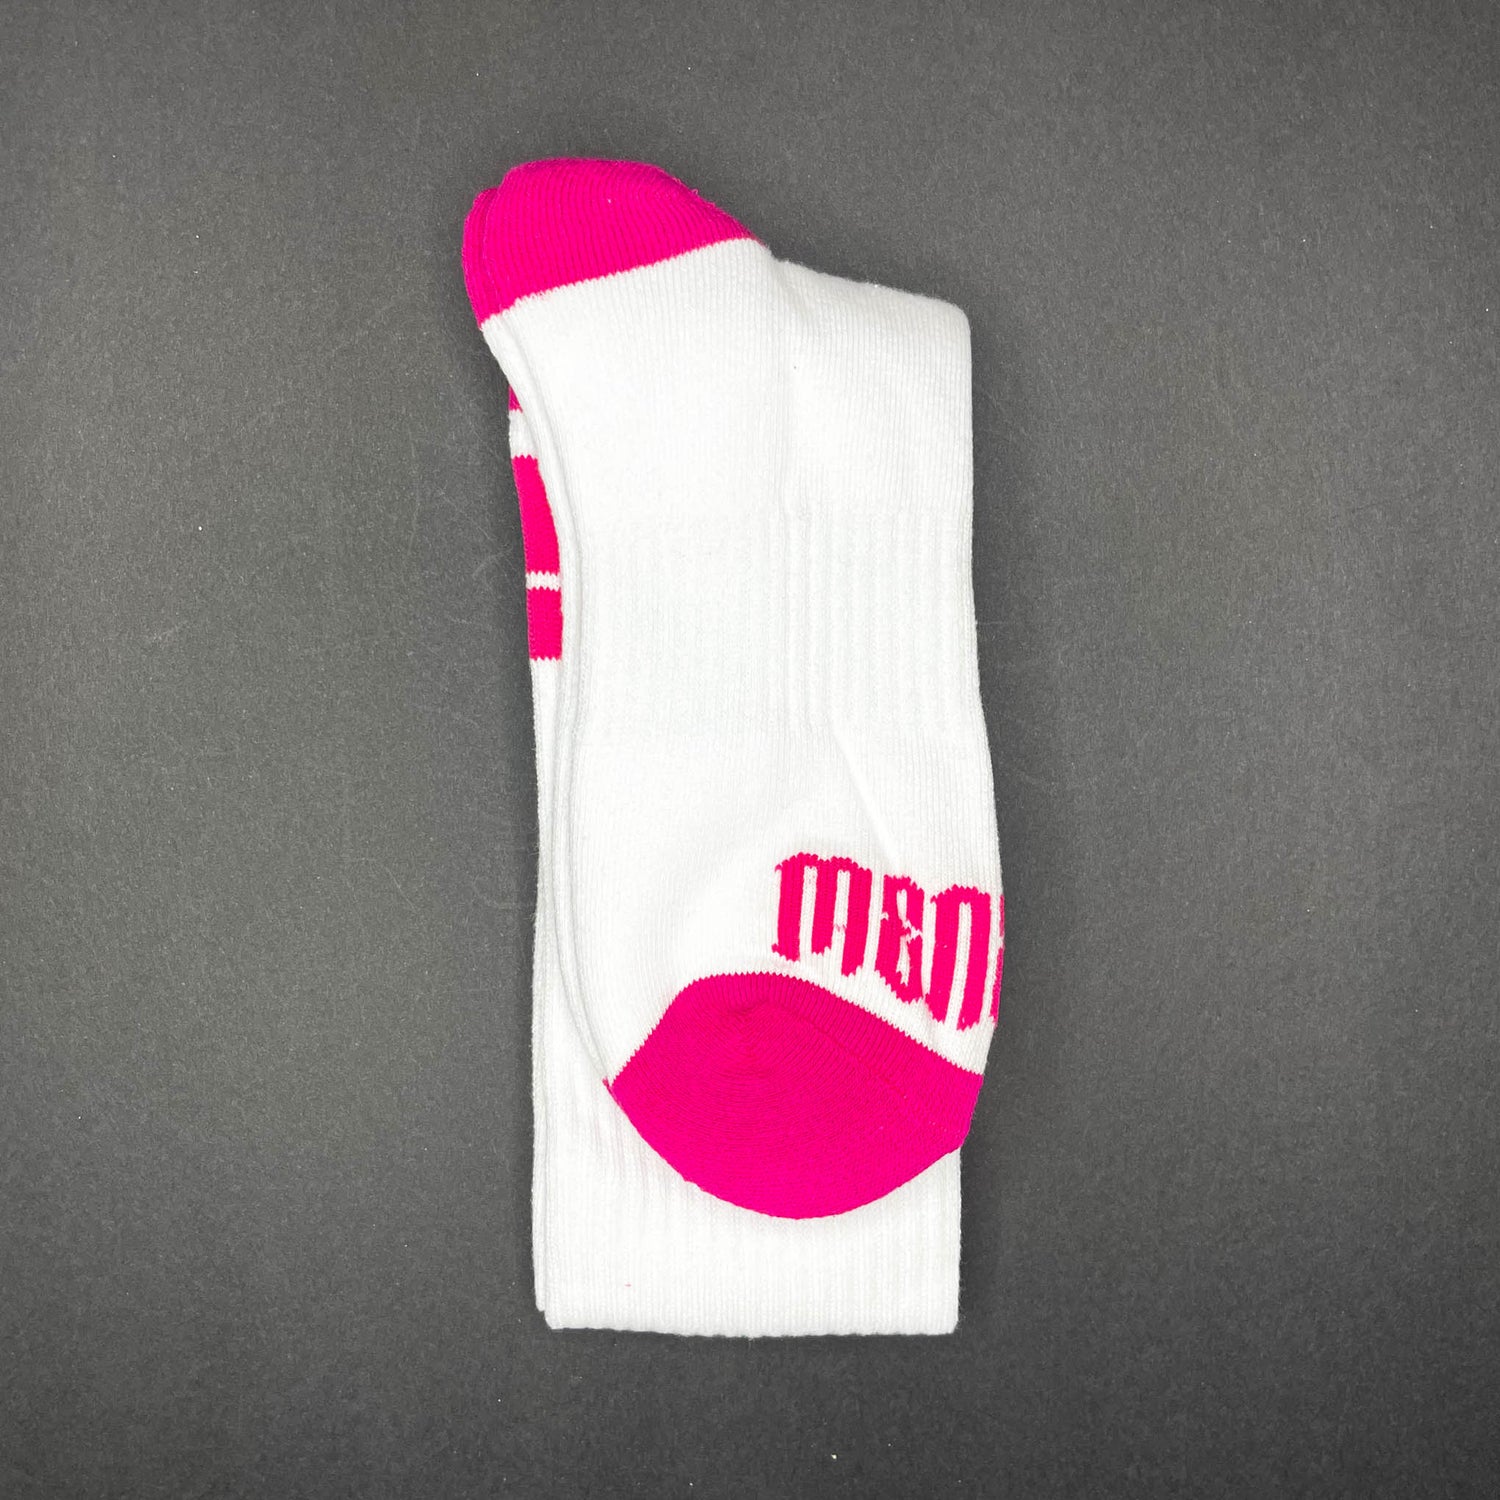 Menace Clothing pink and white Hood Rat knee high socks with Menace on toes.